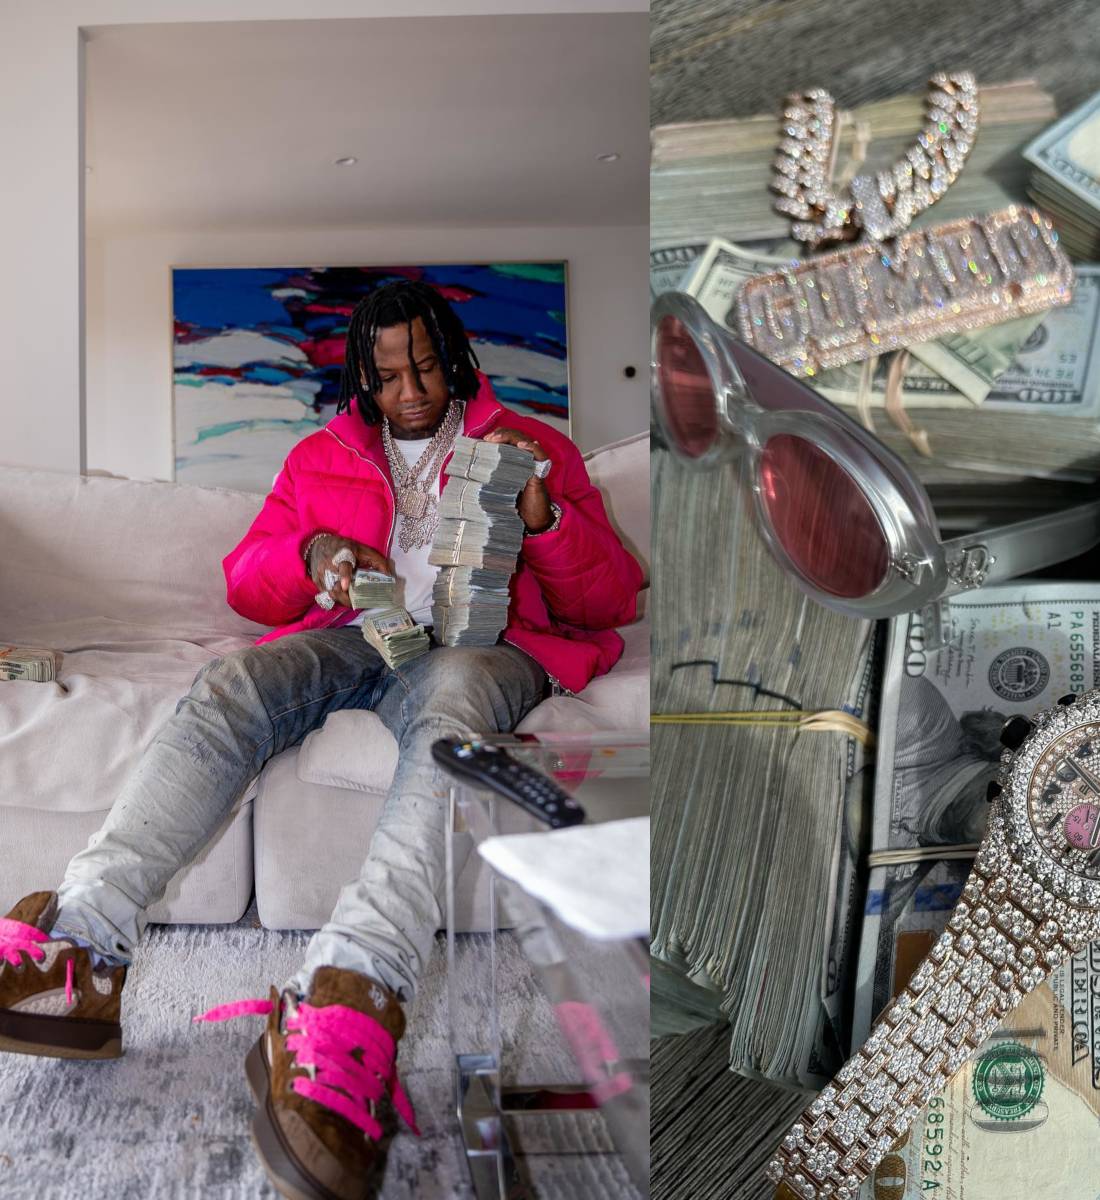 Moneybagg Yo Flexes His Jewelry In Pink & Brown Dior x ERL Outfit